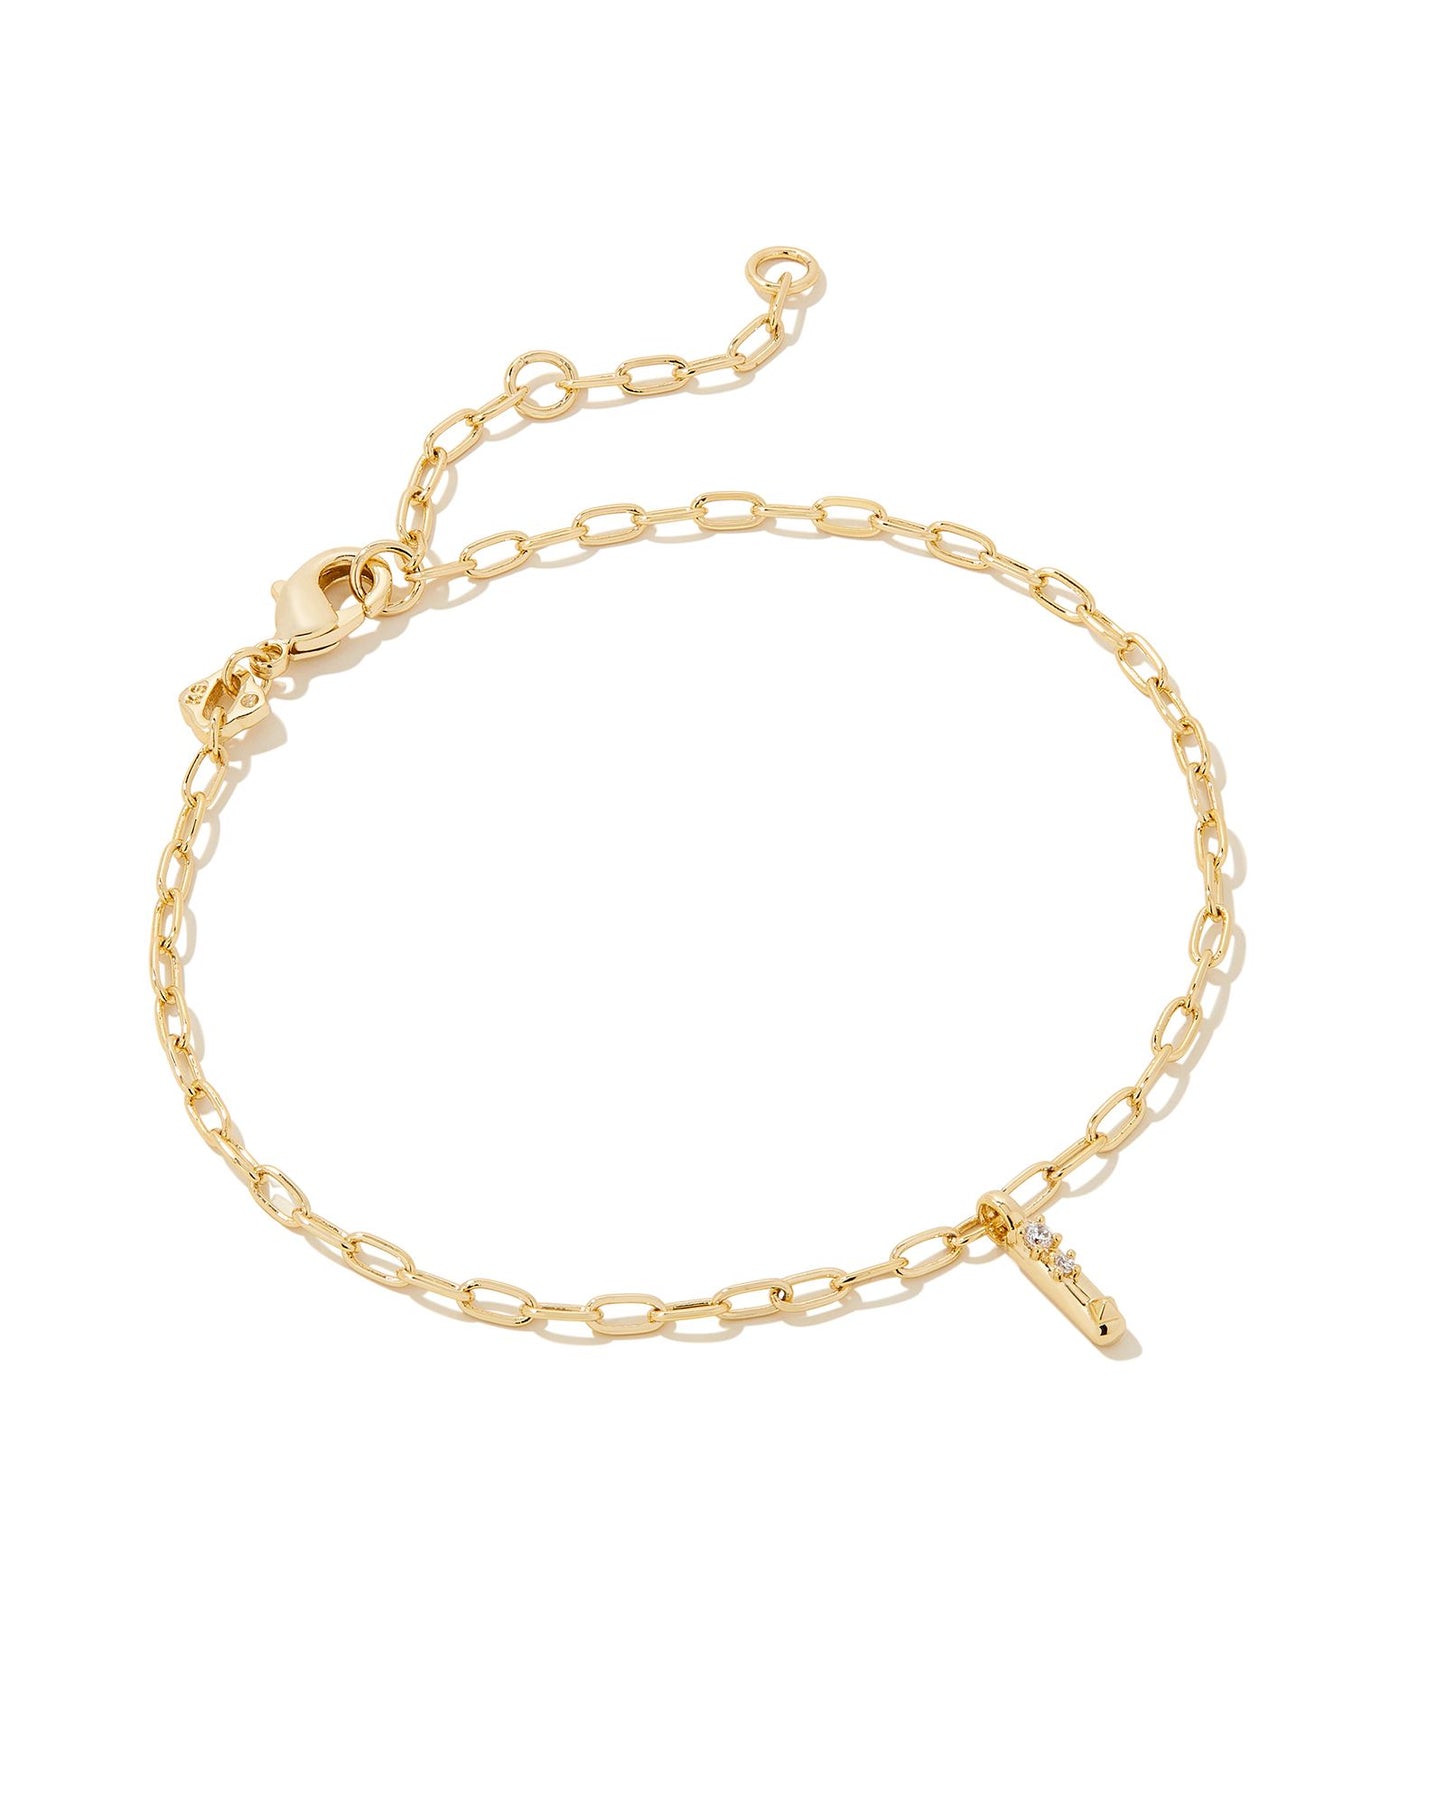 Add a personal touch to your wrist stack with the Crystal Delicate Chain Bracelet in White Crystal, our first Fashion Jewelry initial bracelet. Featuring a dainty chain and letter charm with a hint of sparkle, this bracelet is the perfect way to celebrate the ones you love—including yourself!  Dimensions- 6.5' CHAIN WITH 1.5' EXTENDER, 0.45'L X 0.26"W PENDANT Metal- 14K Gold plated over brass Closure- Lobster Clasp Material-  White CZ Letter I